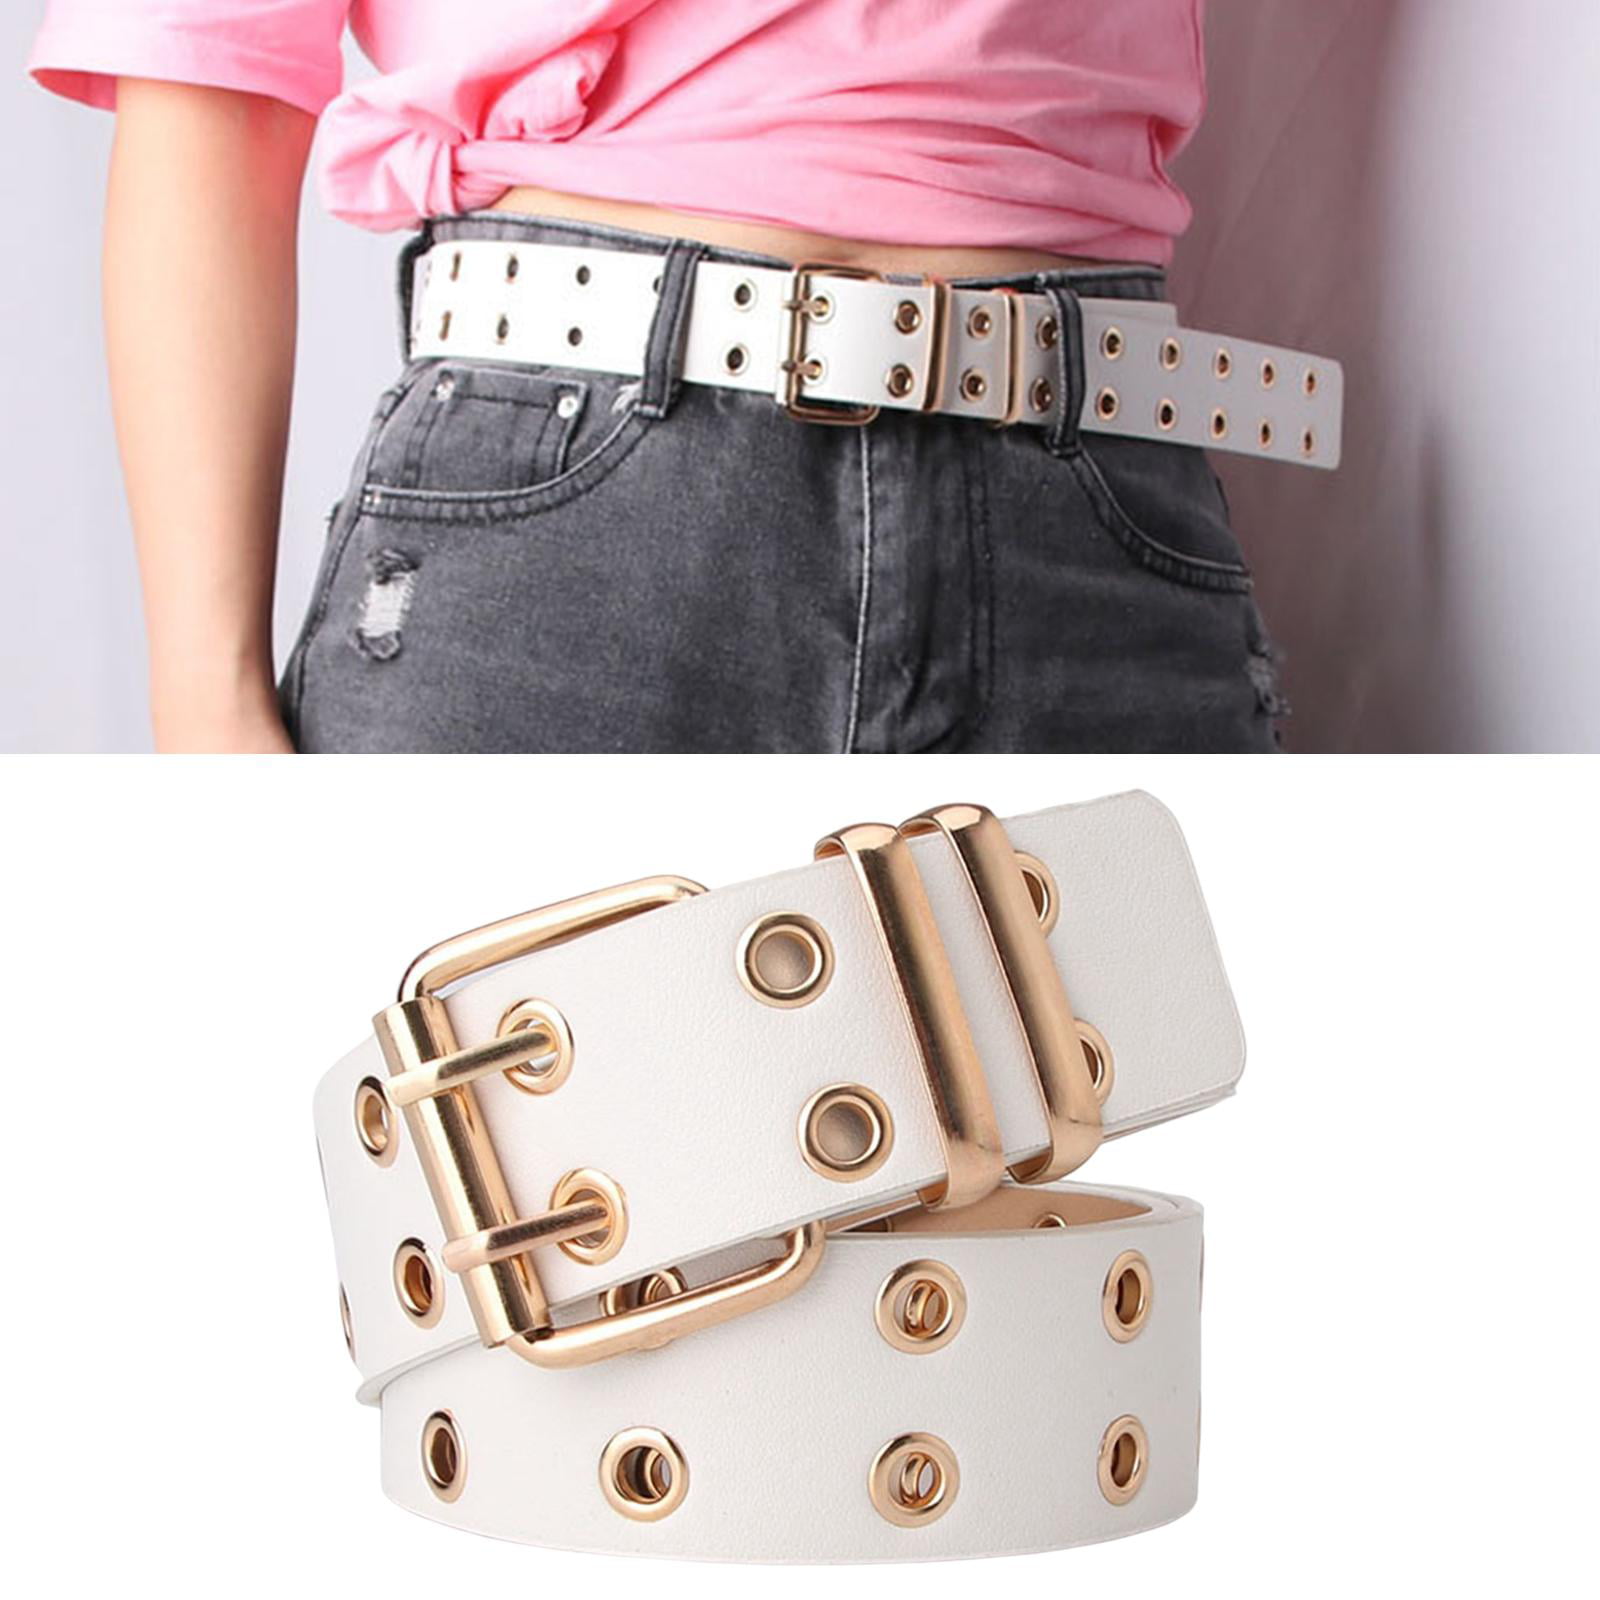 Punk with Accessories, White Pants PU Gothic Eyelet Jeans. Double Hollow Adjustable Leather Grommet Vintage Fashion Belt, , for